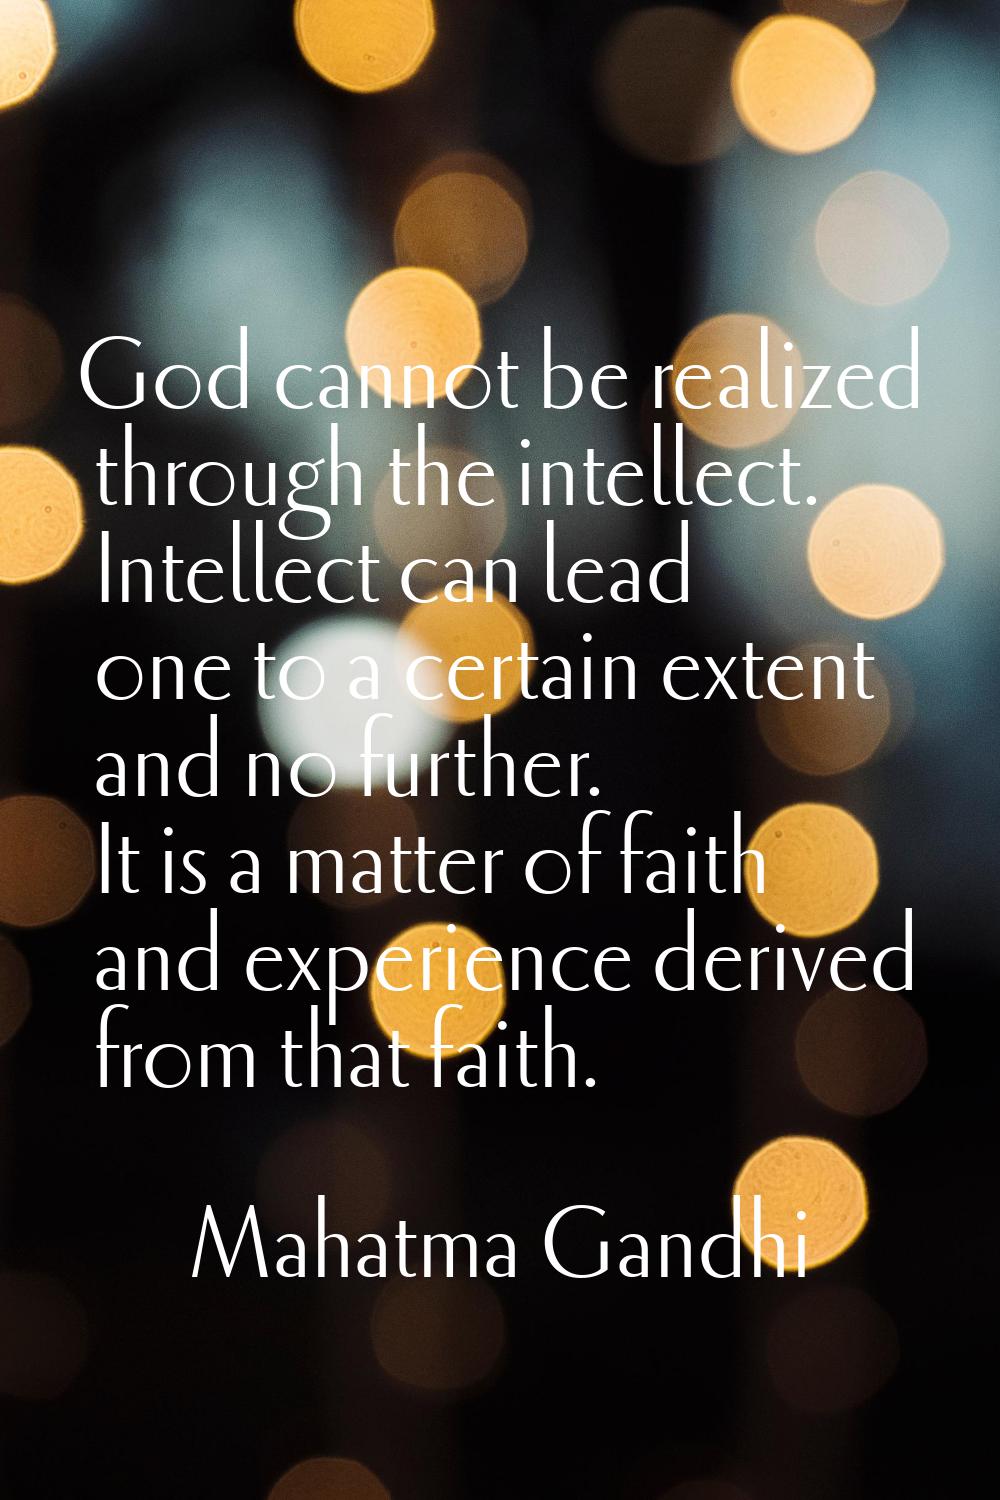 God cannot be realized through the intellect. Intellect can lead one to a certain extent and no fur